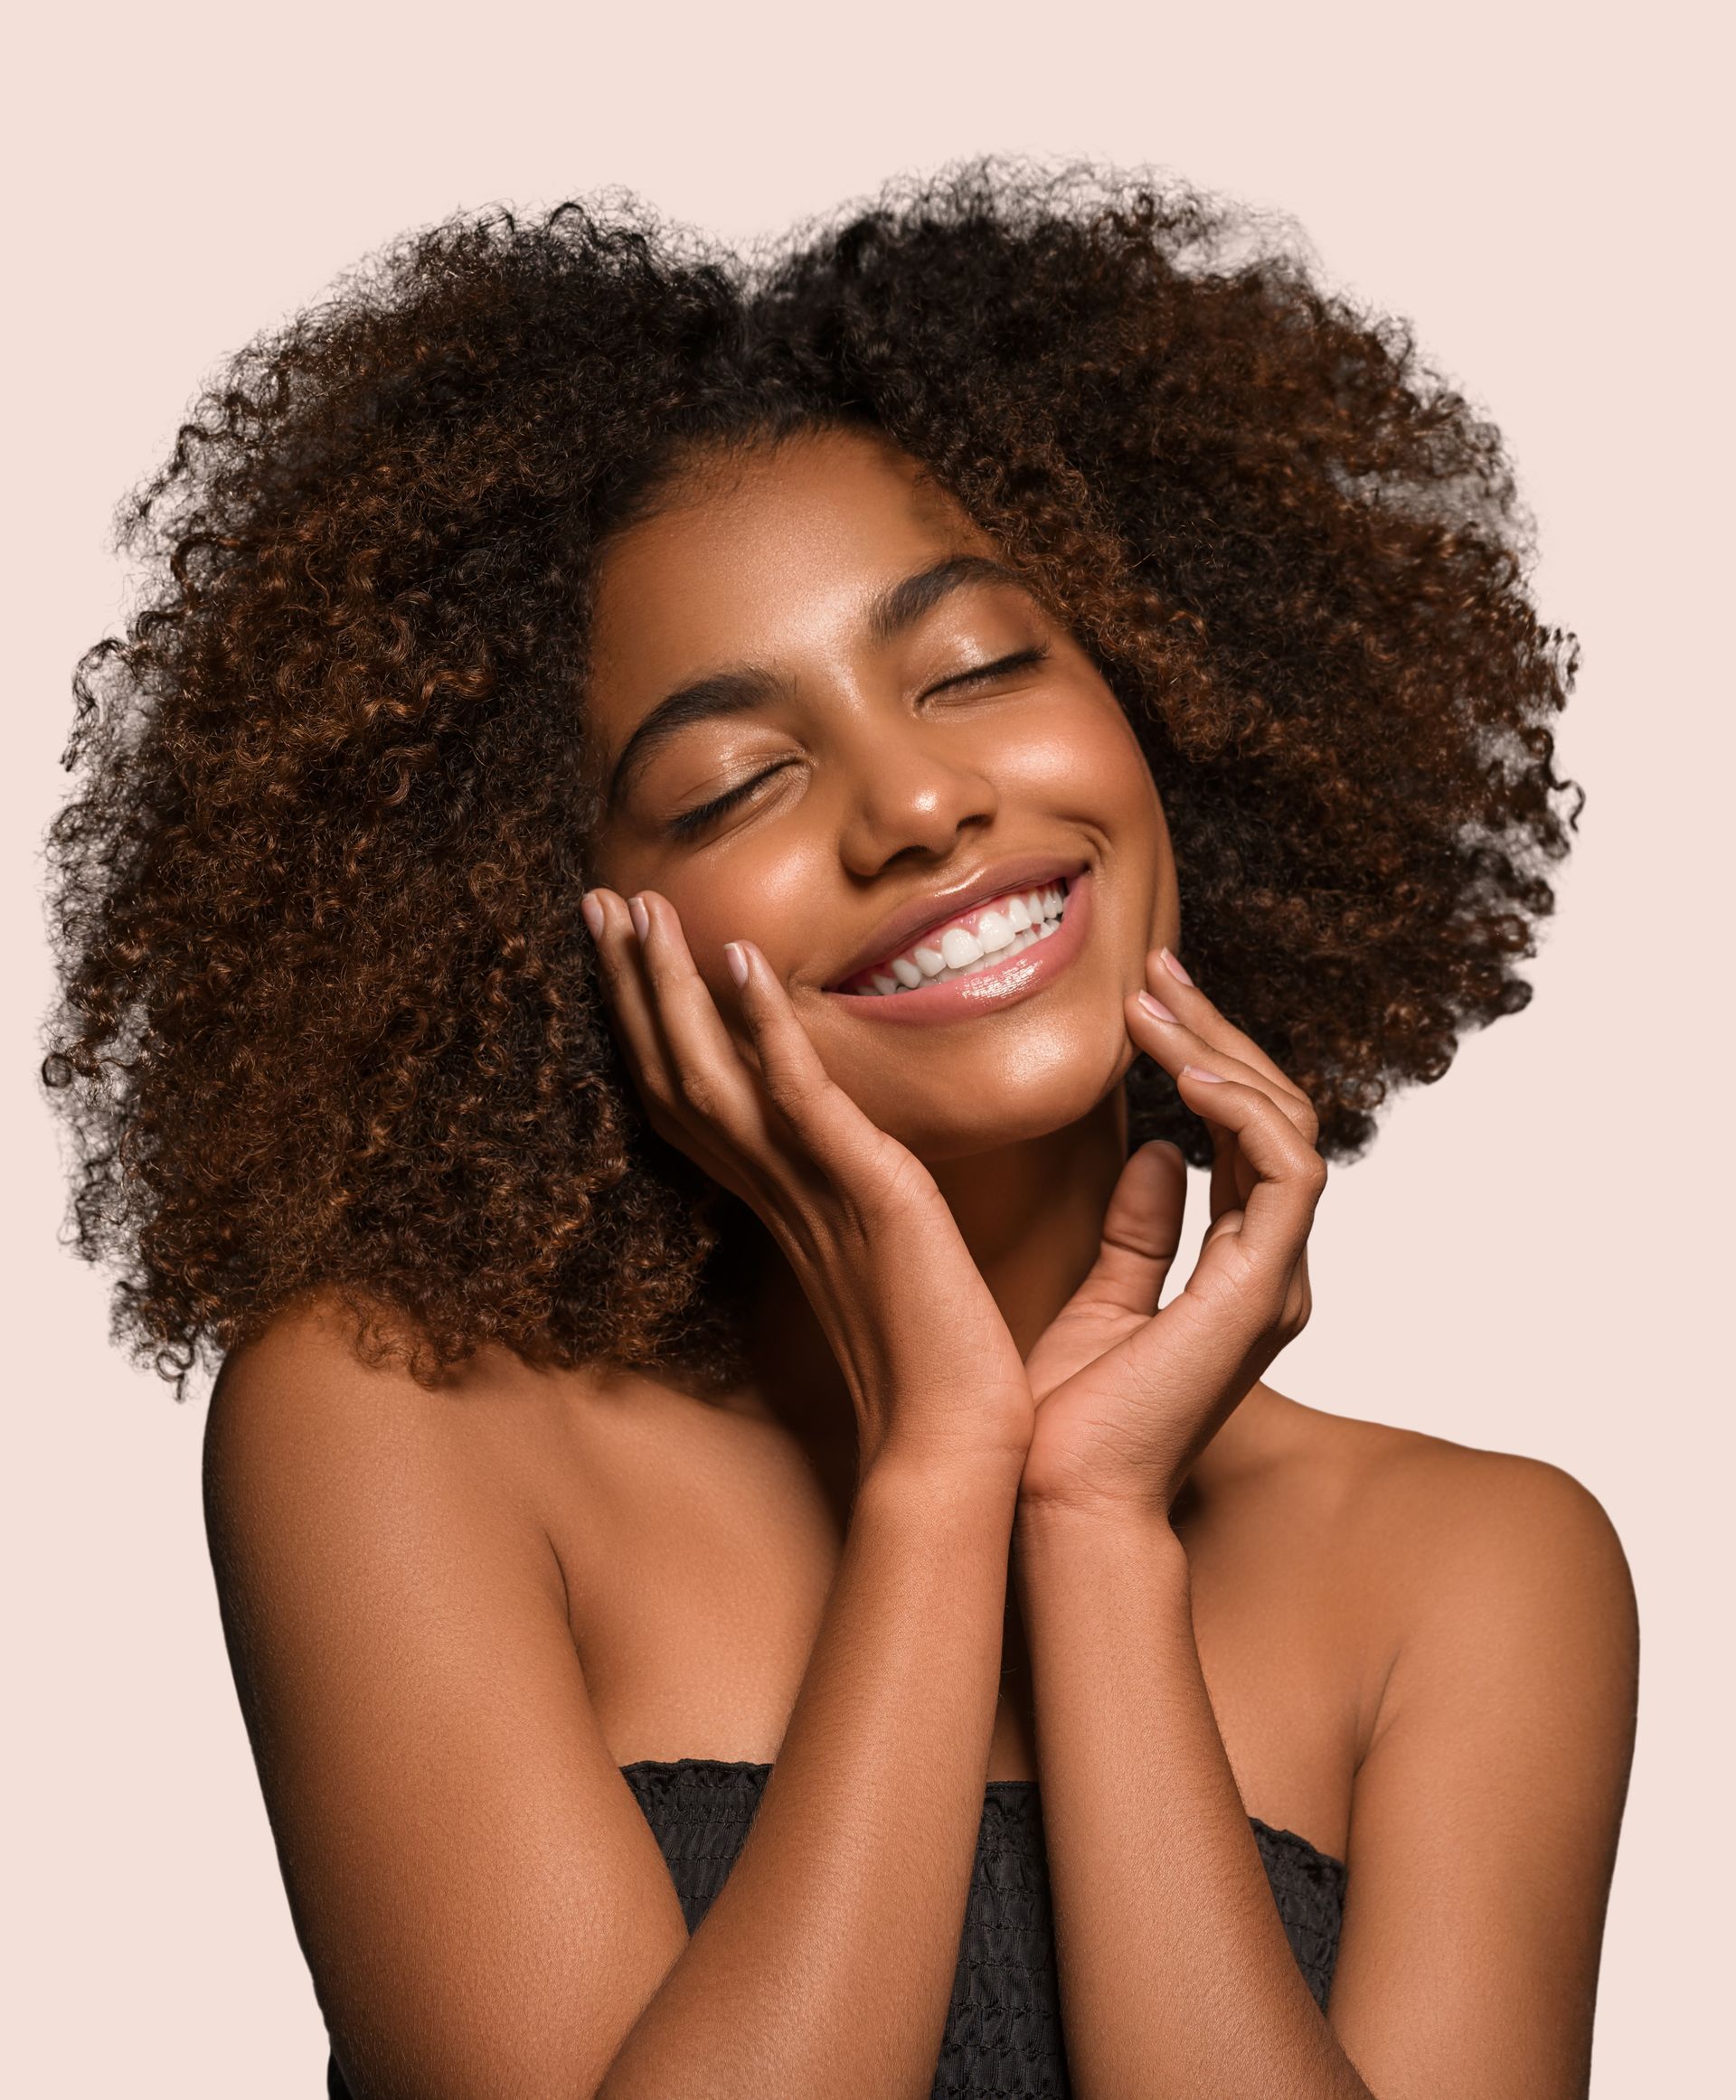 a woman with curly hair is smiling and touching her face with her hands .